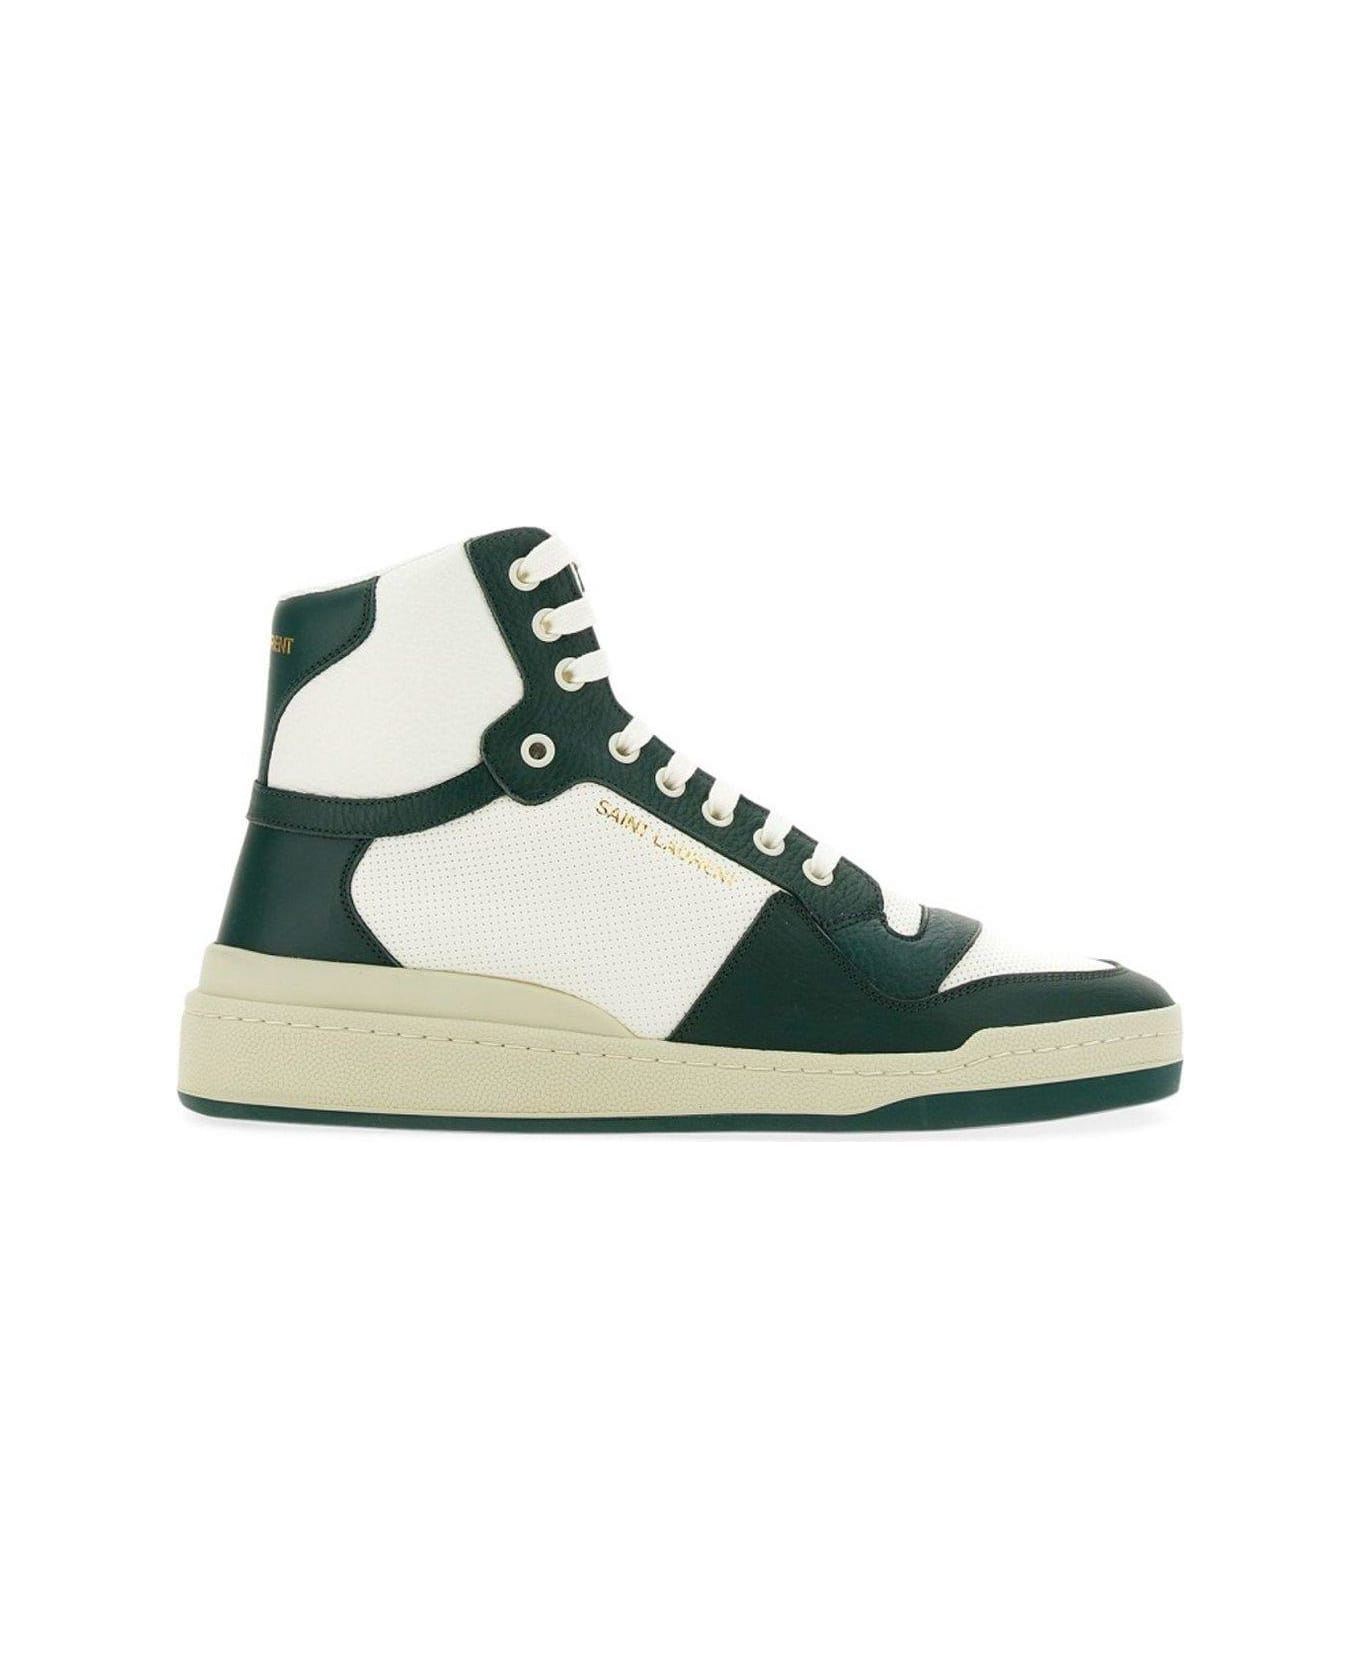 Saint Laurent Round Toe Lace-up Sneakers - Green スニーカー